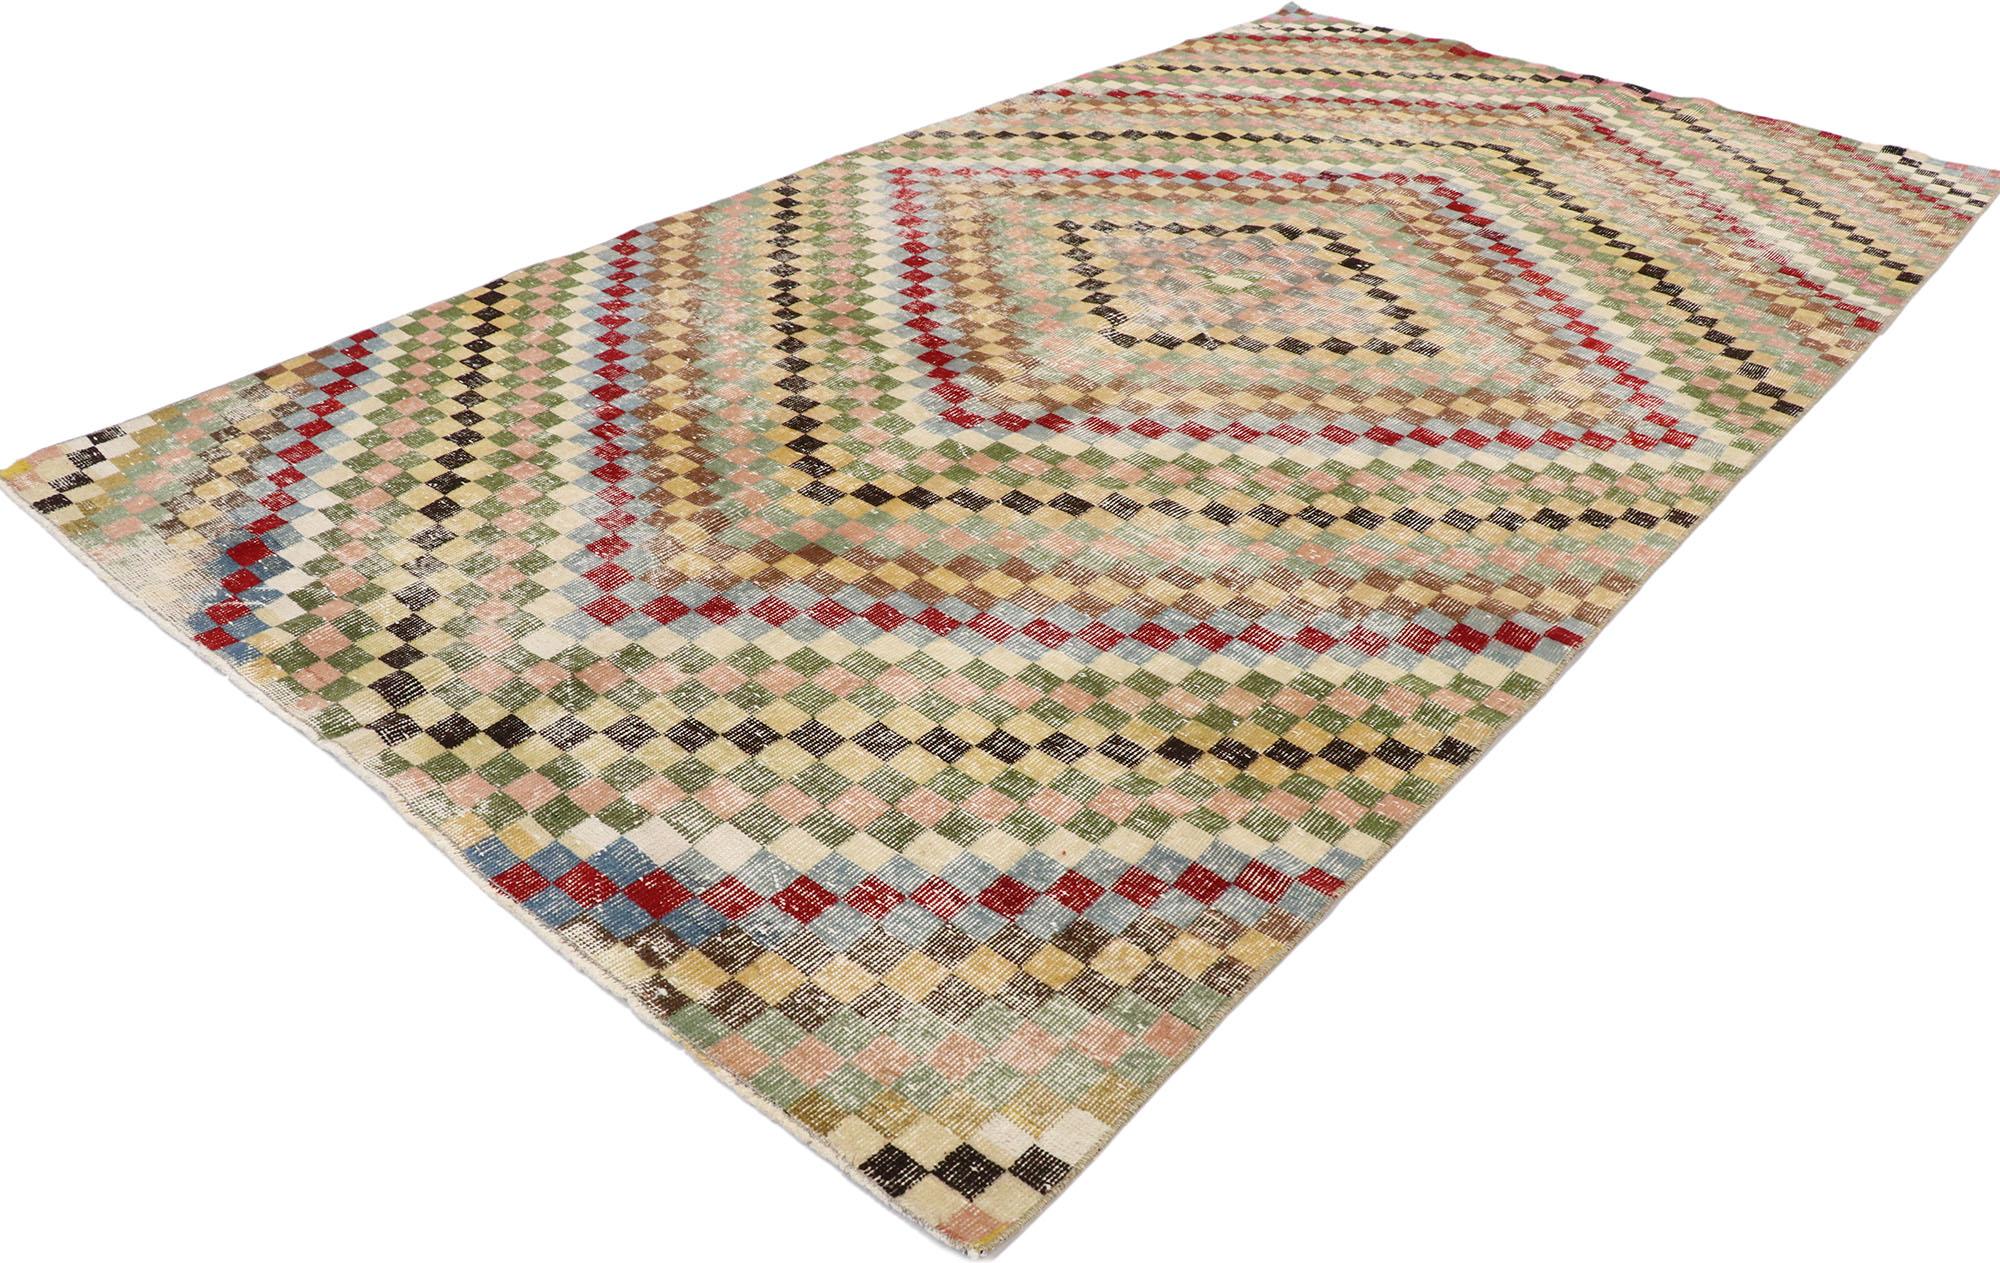 53376, Distressed Vintage Turkish Sivas Rug with Modern Cubist Style. This hand knotted wool distressed vintage Turkish Sivas rug features an all-over checkered pattern. Color-blocked concentric diamonds comprised of small cubes and squares radiate